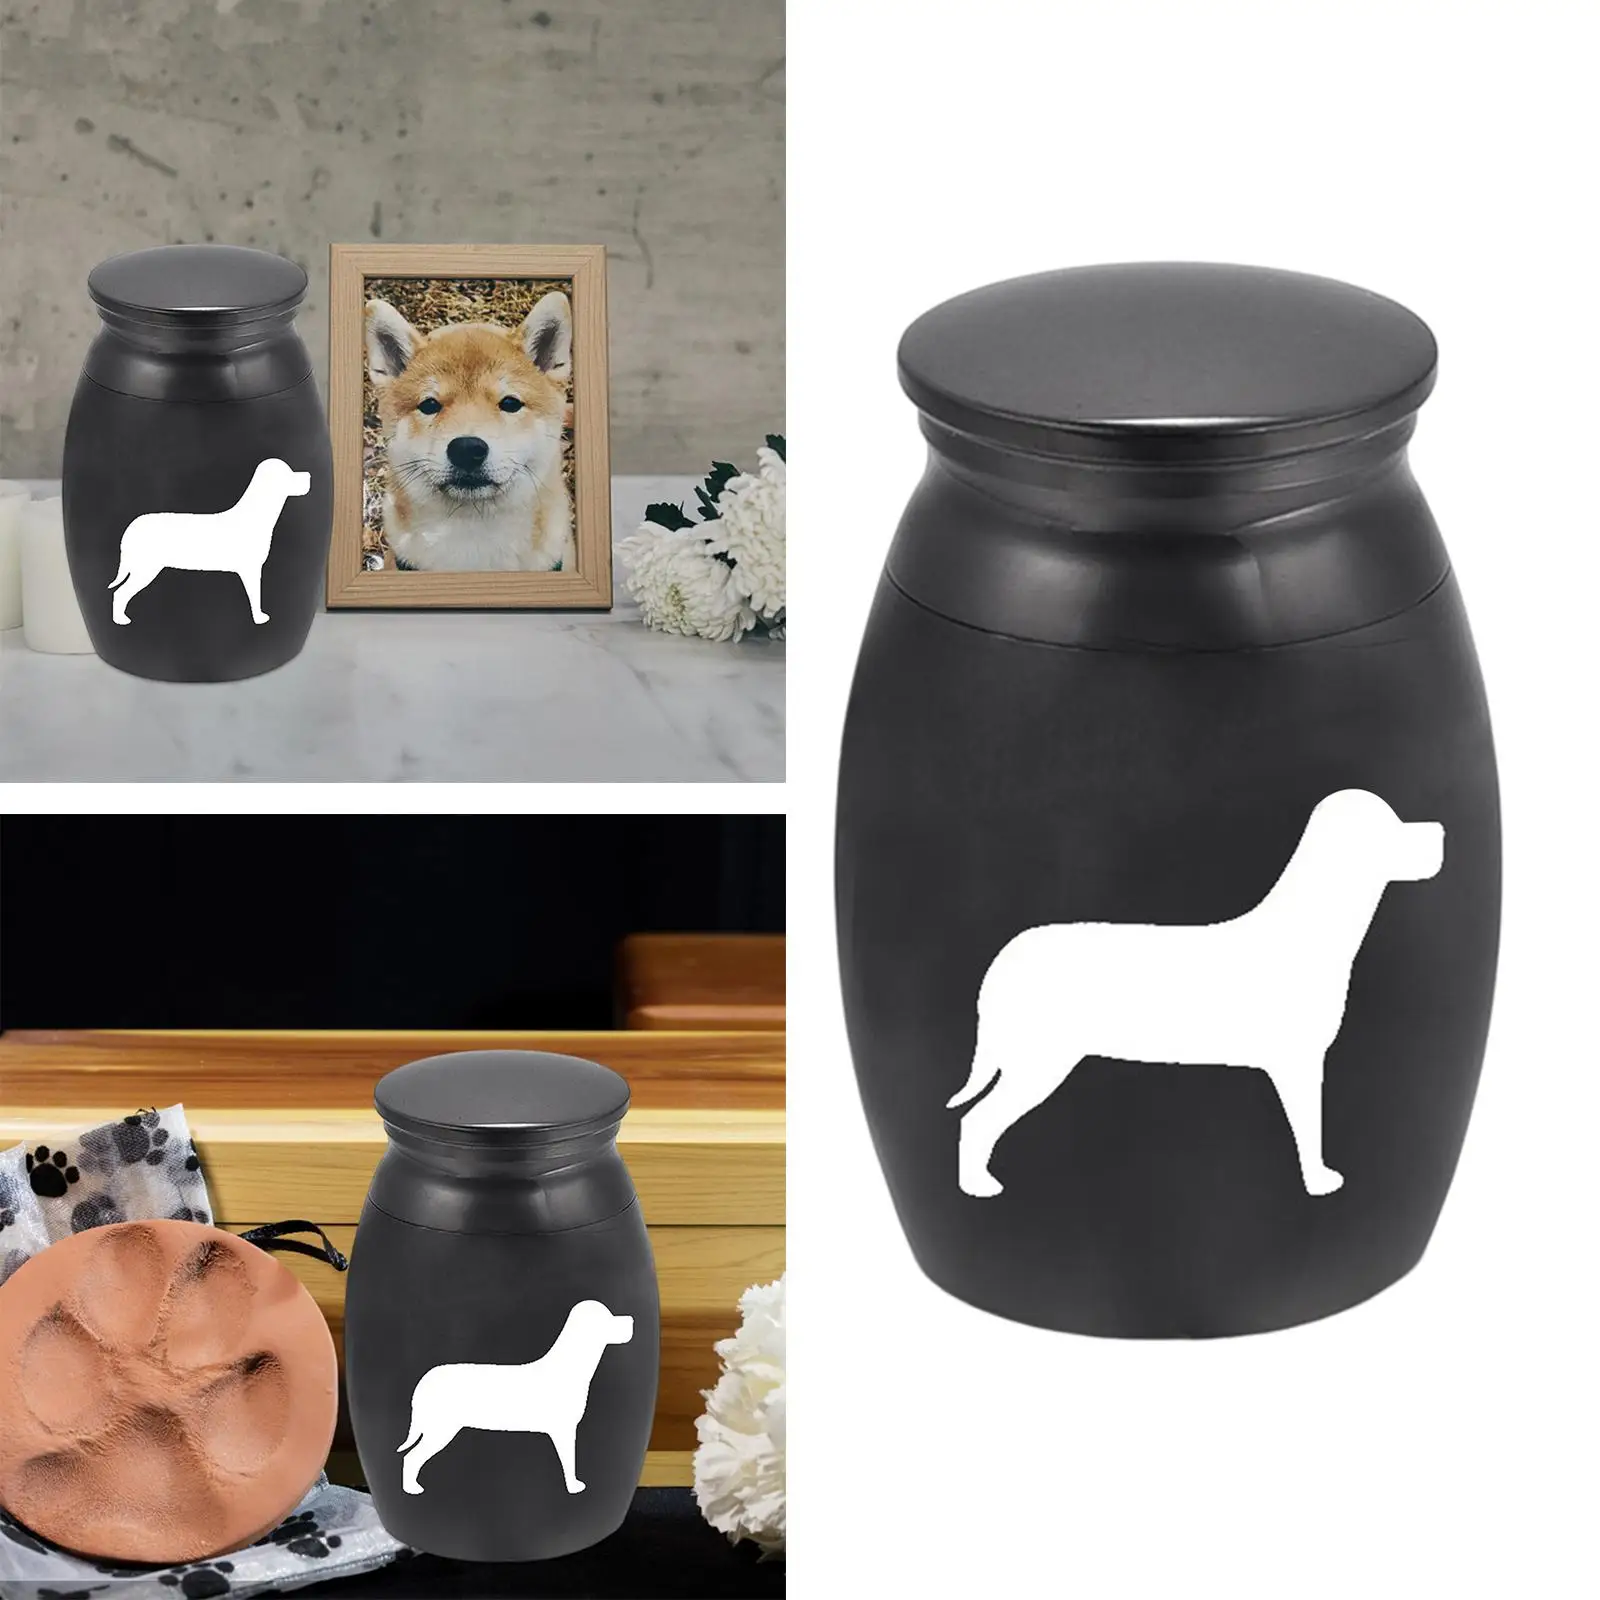 Pet Urn for Dogs Cats Ash Easy to Carry Remembrance Fittings Lightweight Funeral Memorial Keepsake Container Cinerary Casket